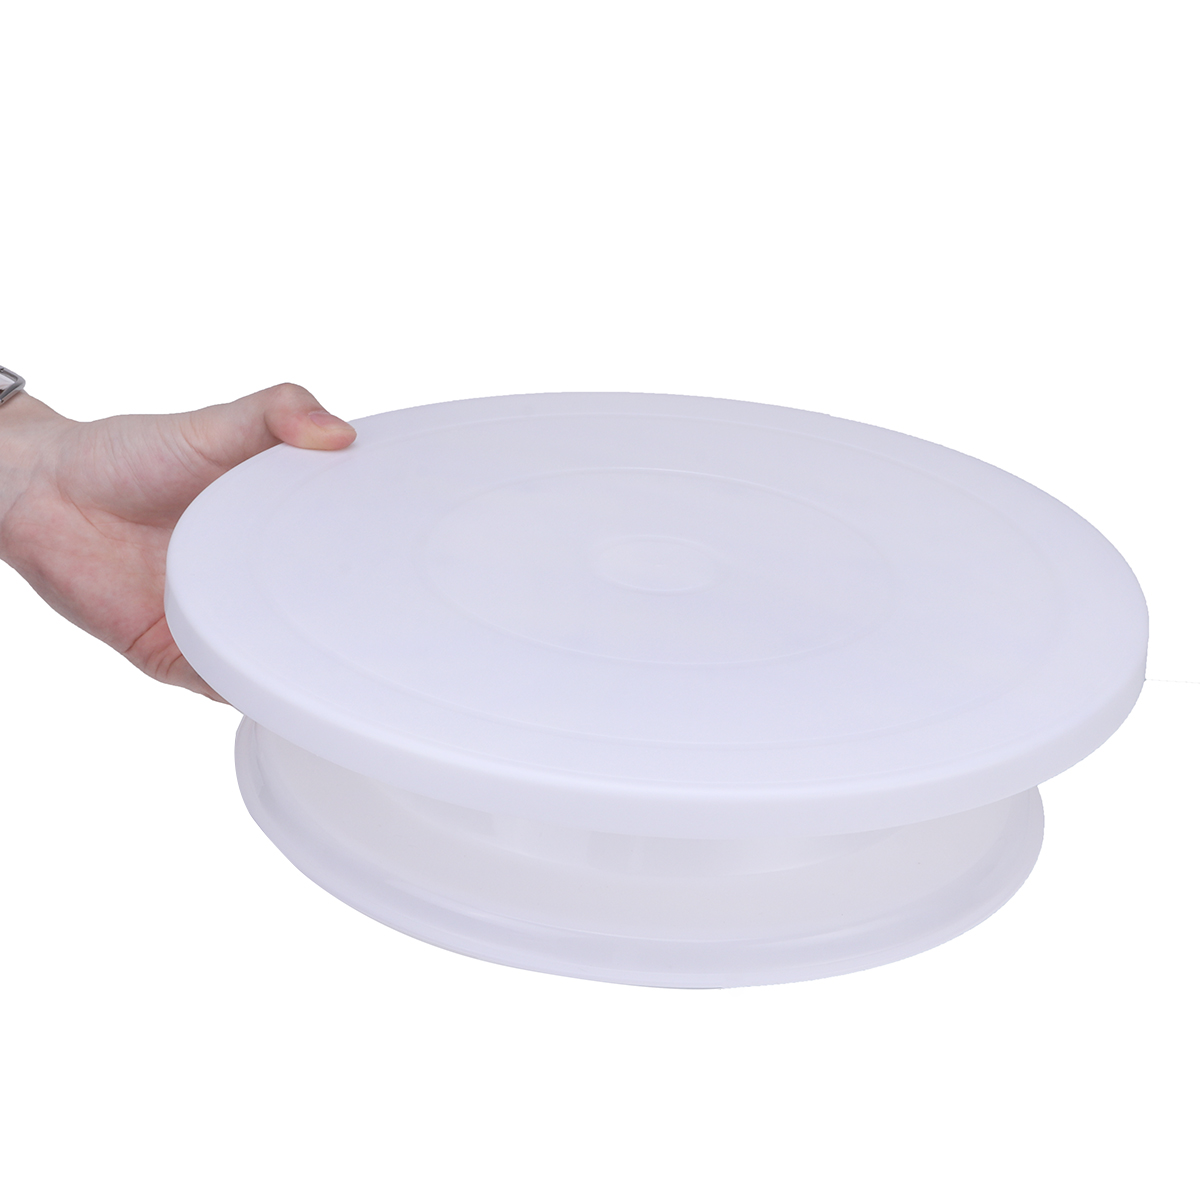 28cm-Rotating-Cake-Icing-Decorating-Revolving-Display-Stand-Turntable-Smoother-1515760-4